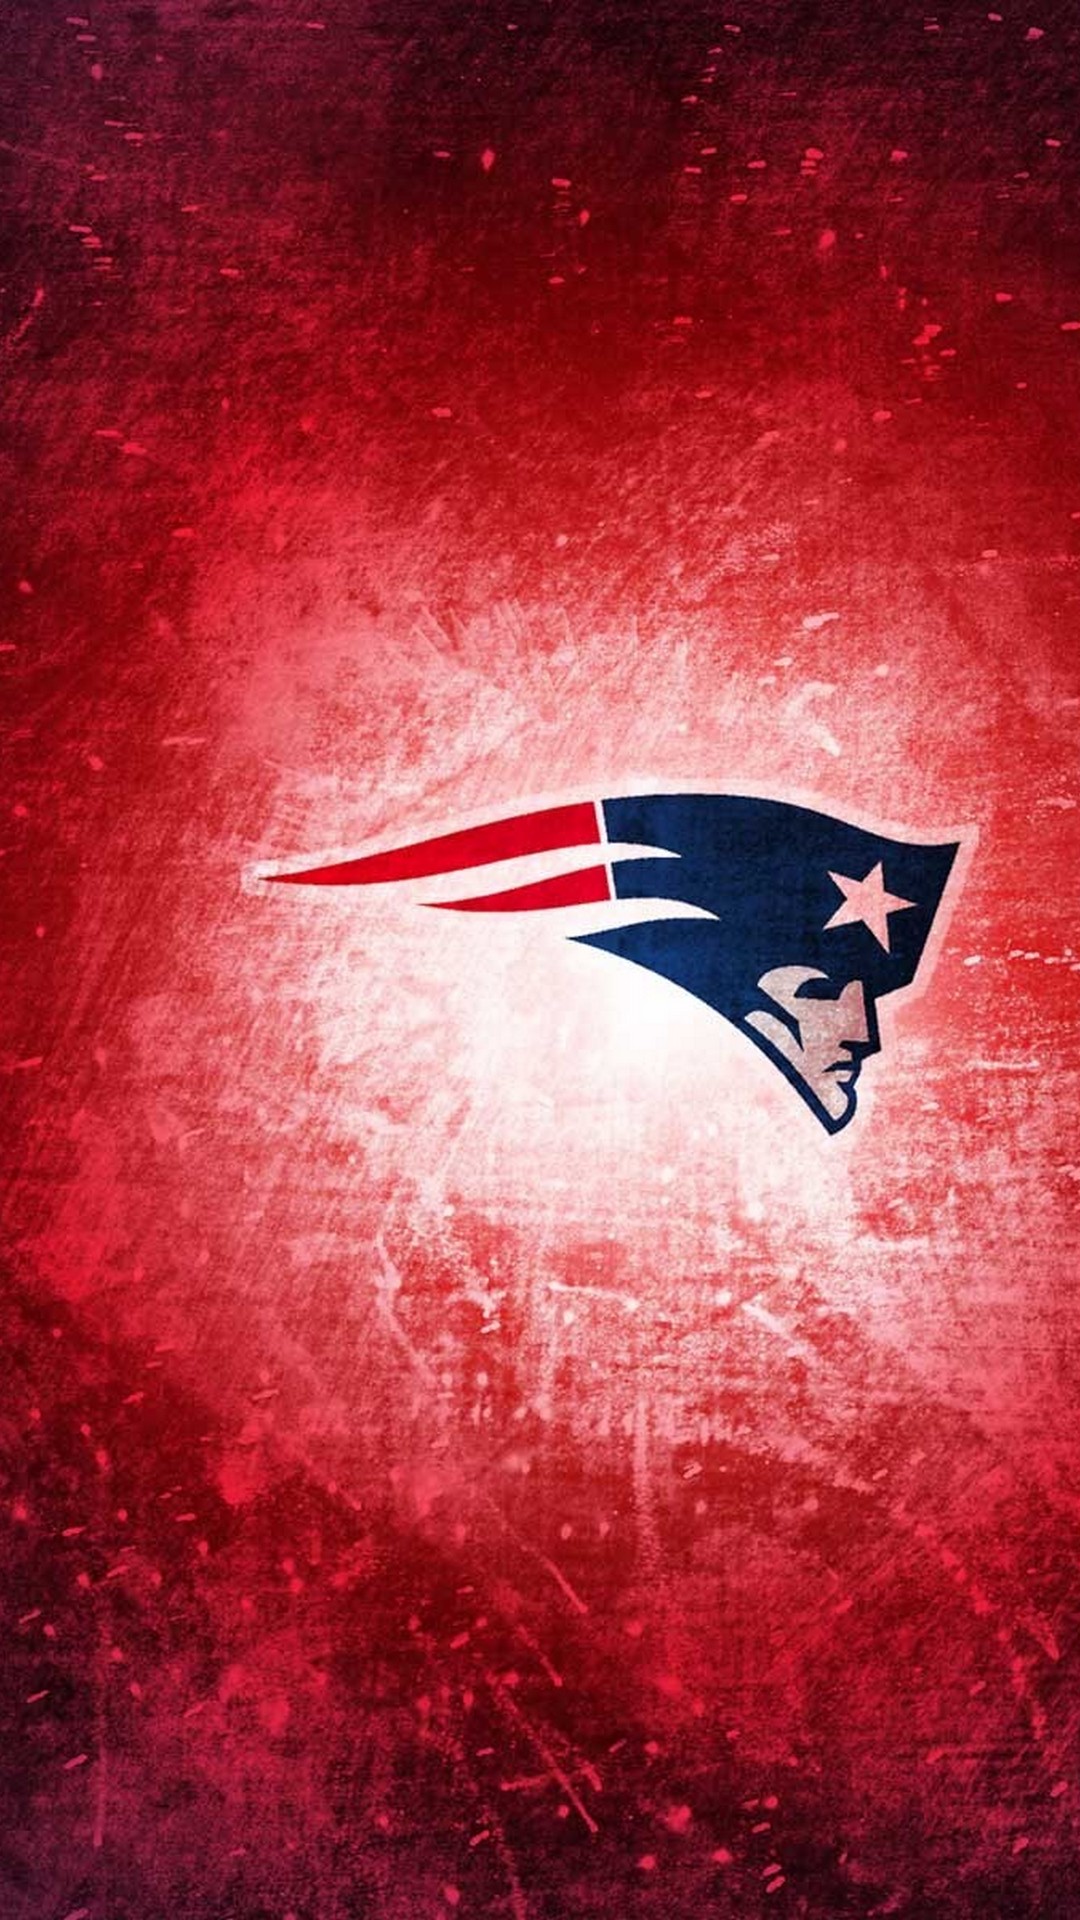 New England Patriots iPhone Screen Lock Wallpaper With high-resolution 1080X1920 pixel. Download and set as wallpaper for Apple iPhone X, XS Max, XR, 8, 7, 6, SE, iPad, Android